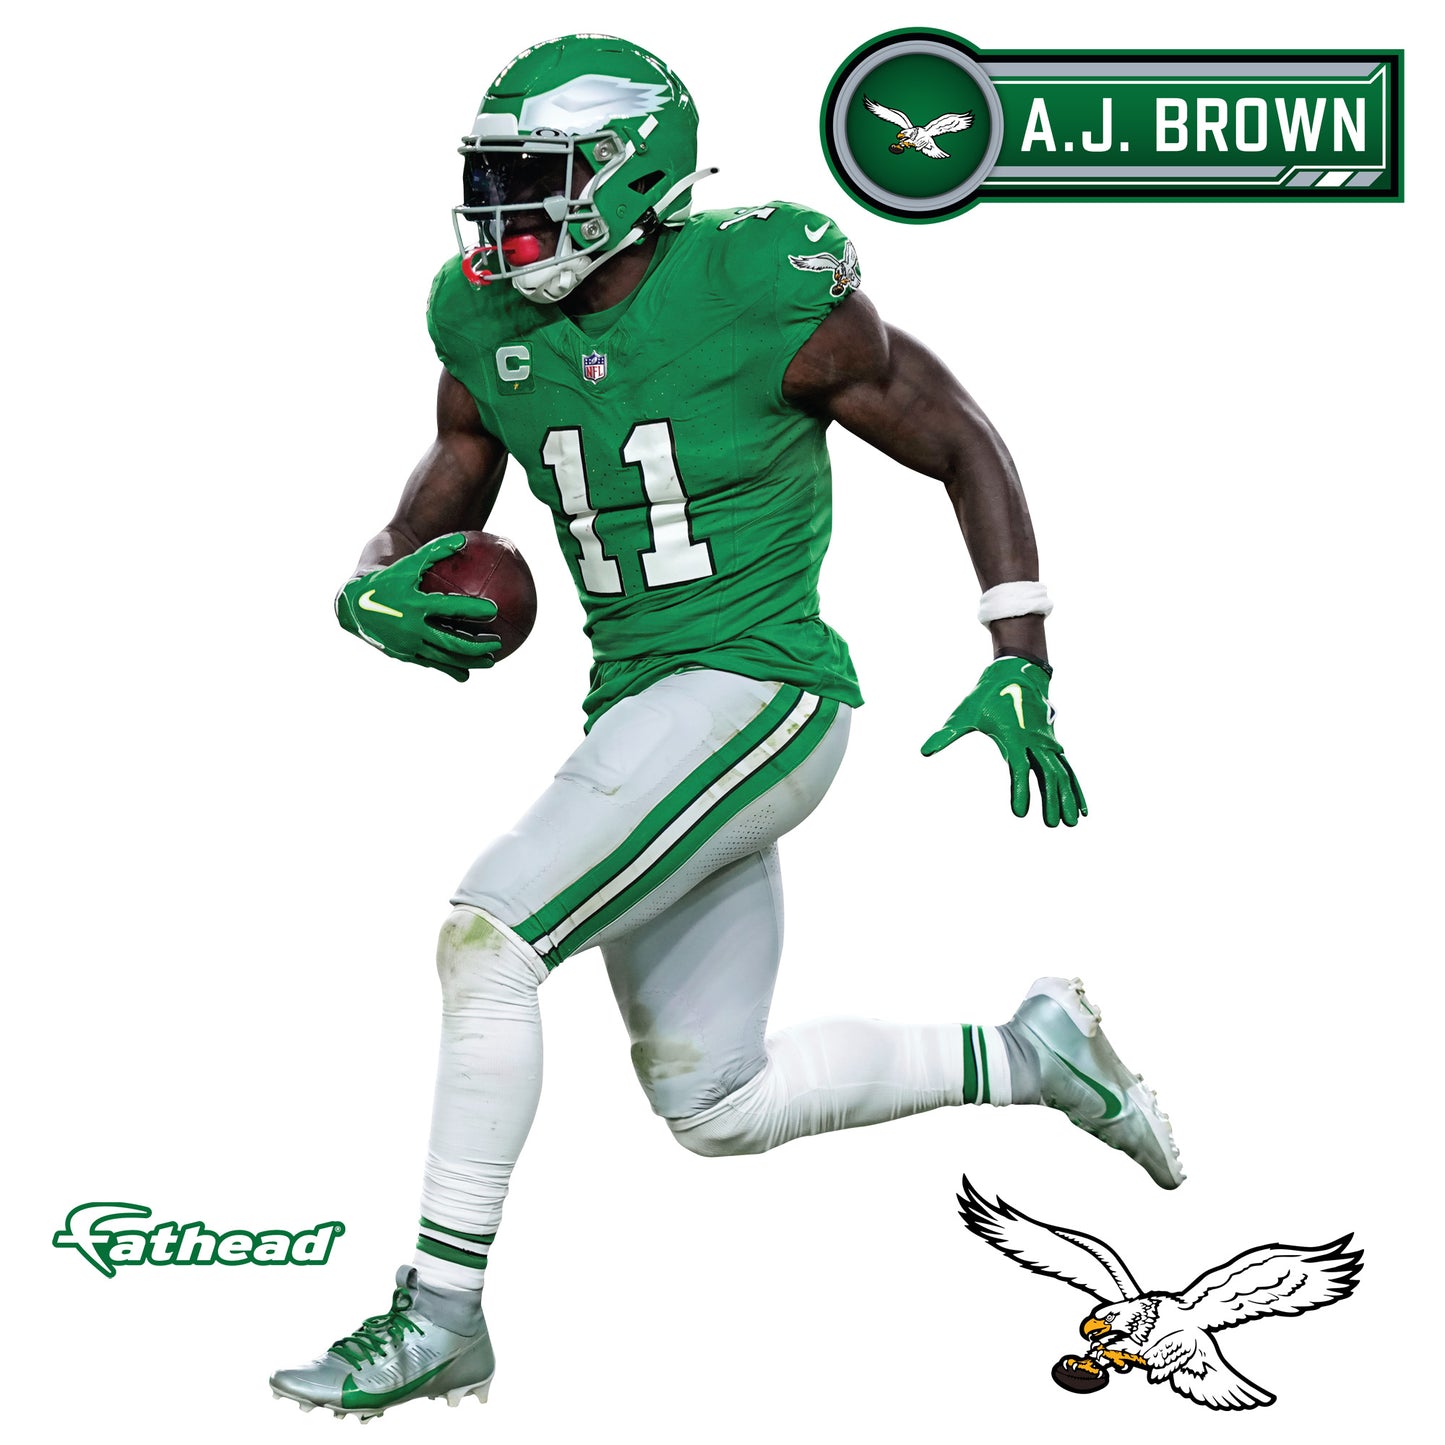 Philadelphia Eagles: A.J. Brown Throwback        - Officially Licensed NFL Removable     Adhesive Decal